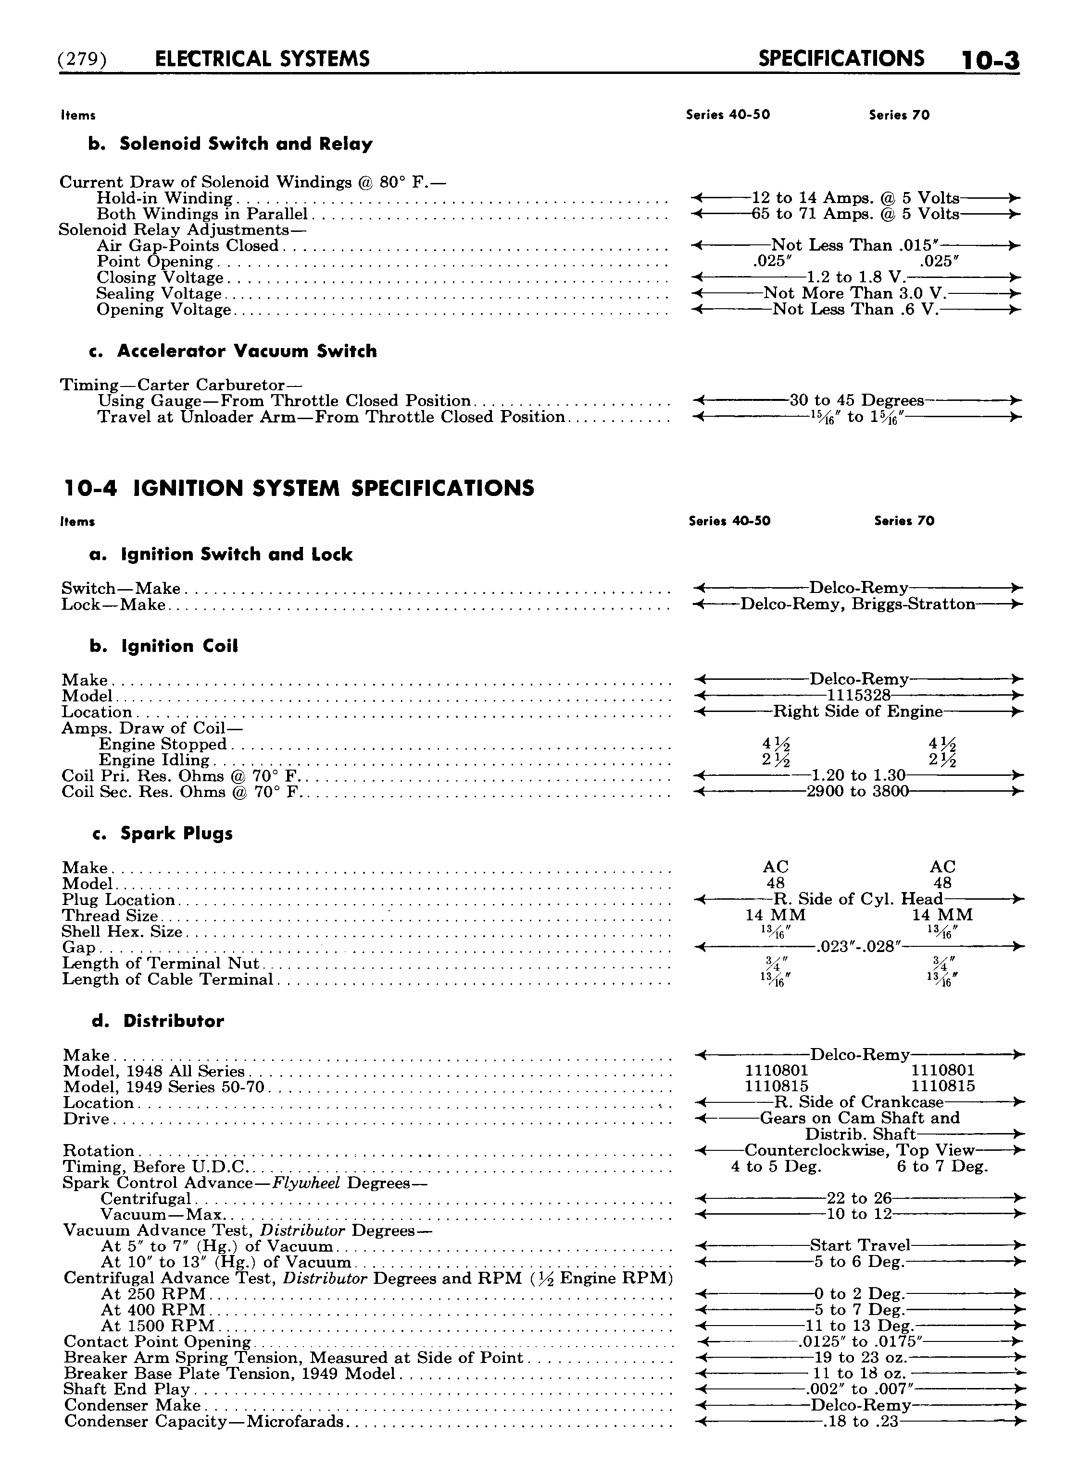 n_11 1948 Buick Shop Manual - Electrical Systems-003-003.jpg